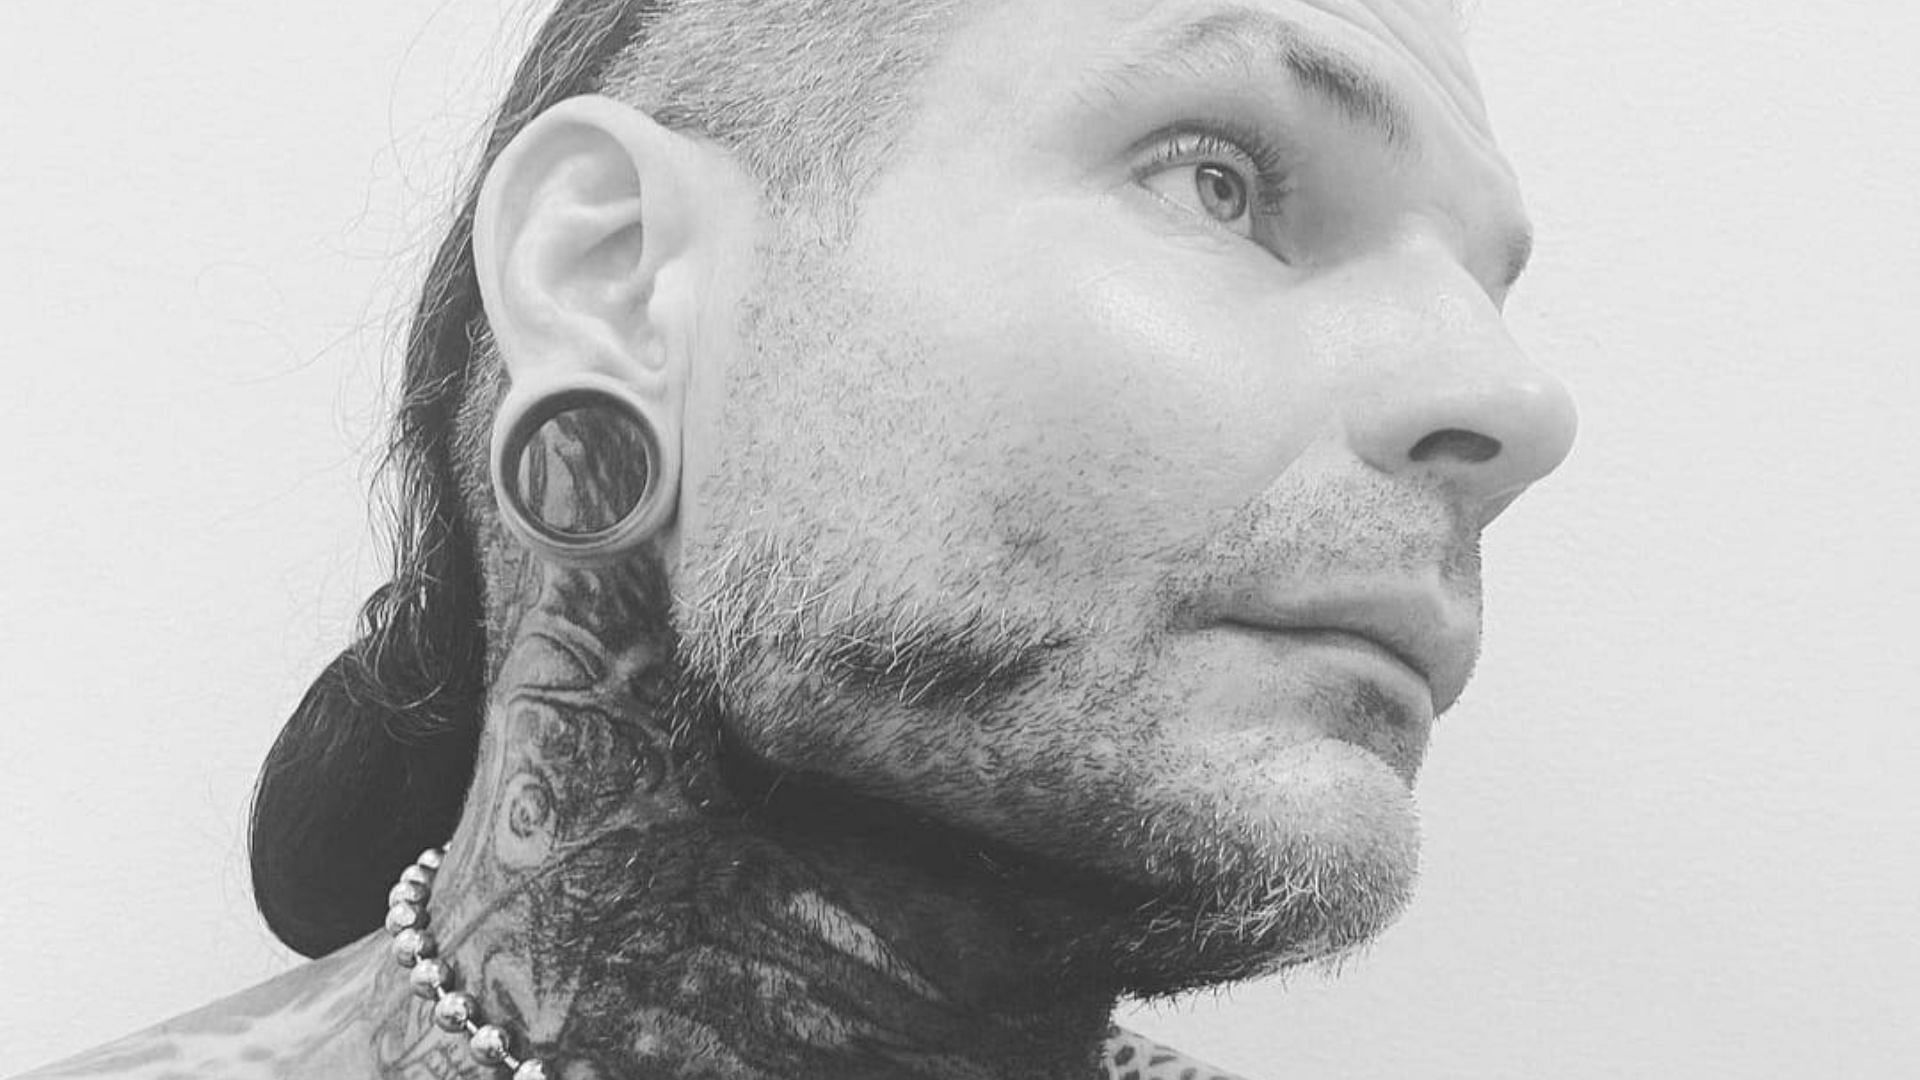 Jeff Hardy is one of the most beloved wrestlers in AEW.